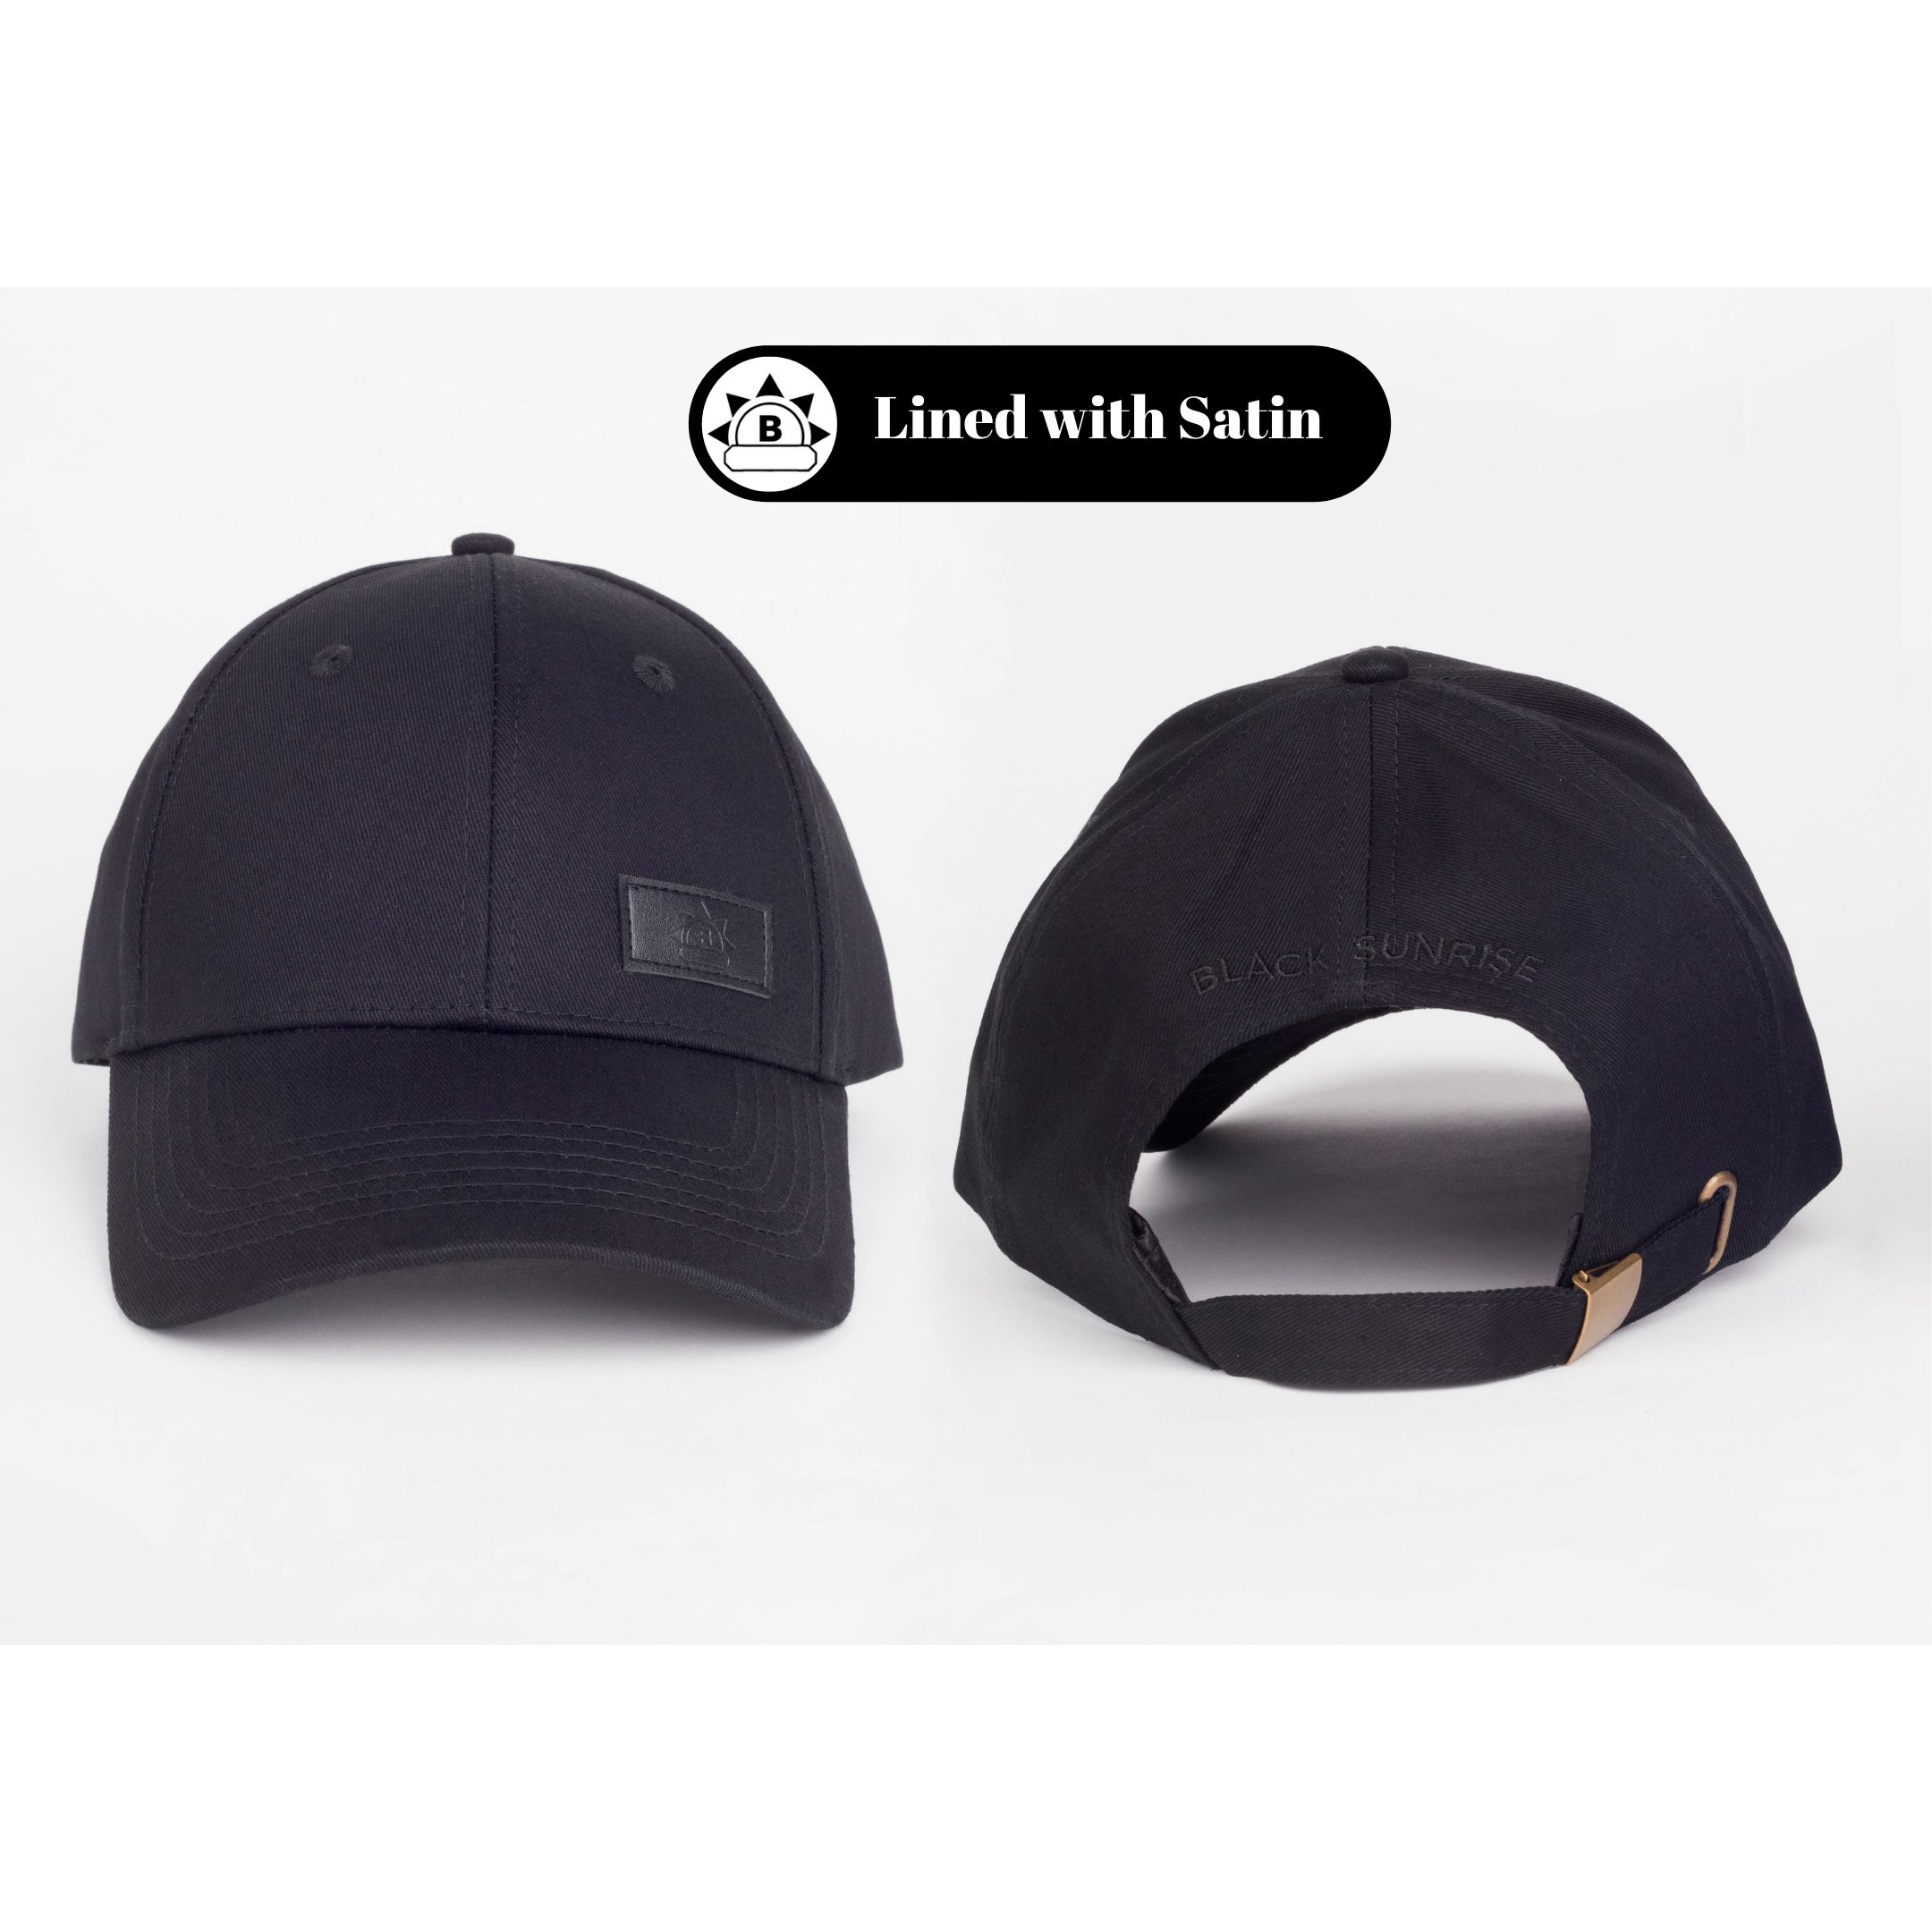 Satin Lined Black Baseball Cap | Half Also Available For Curly Hair